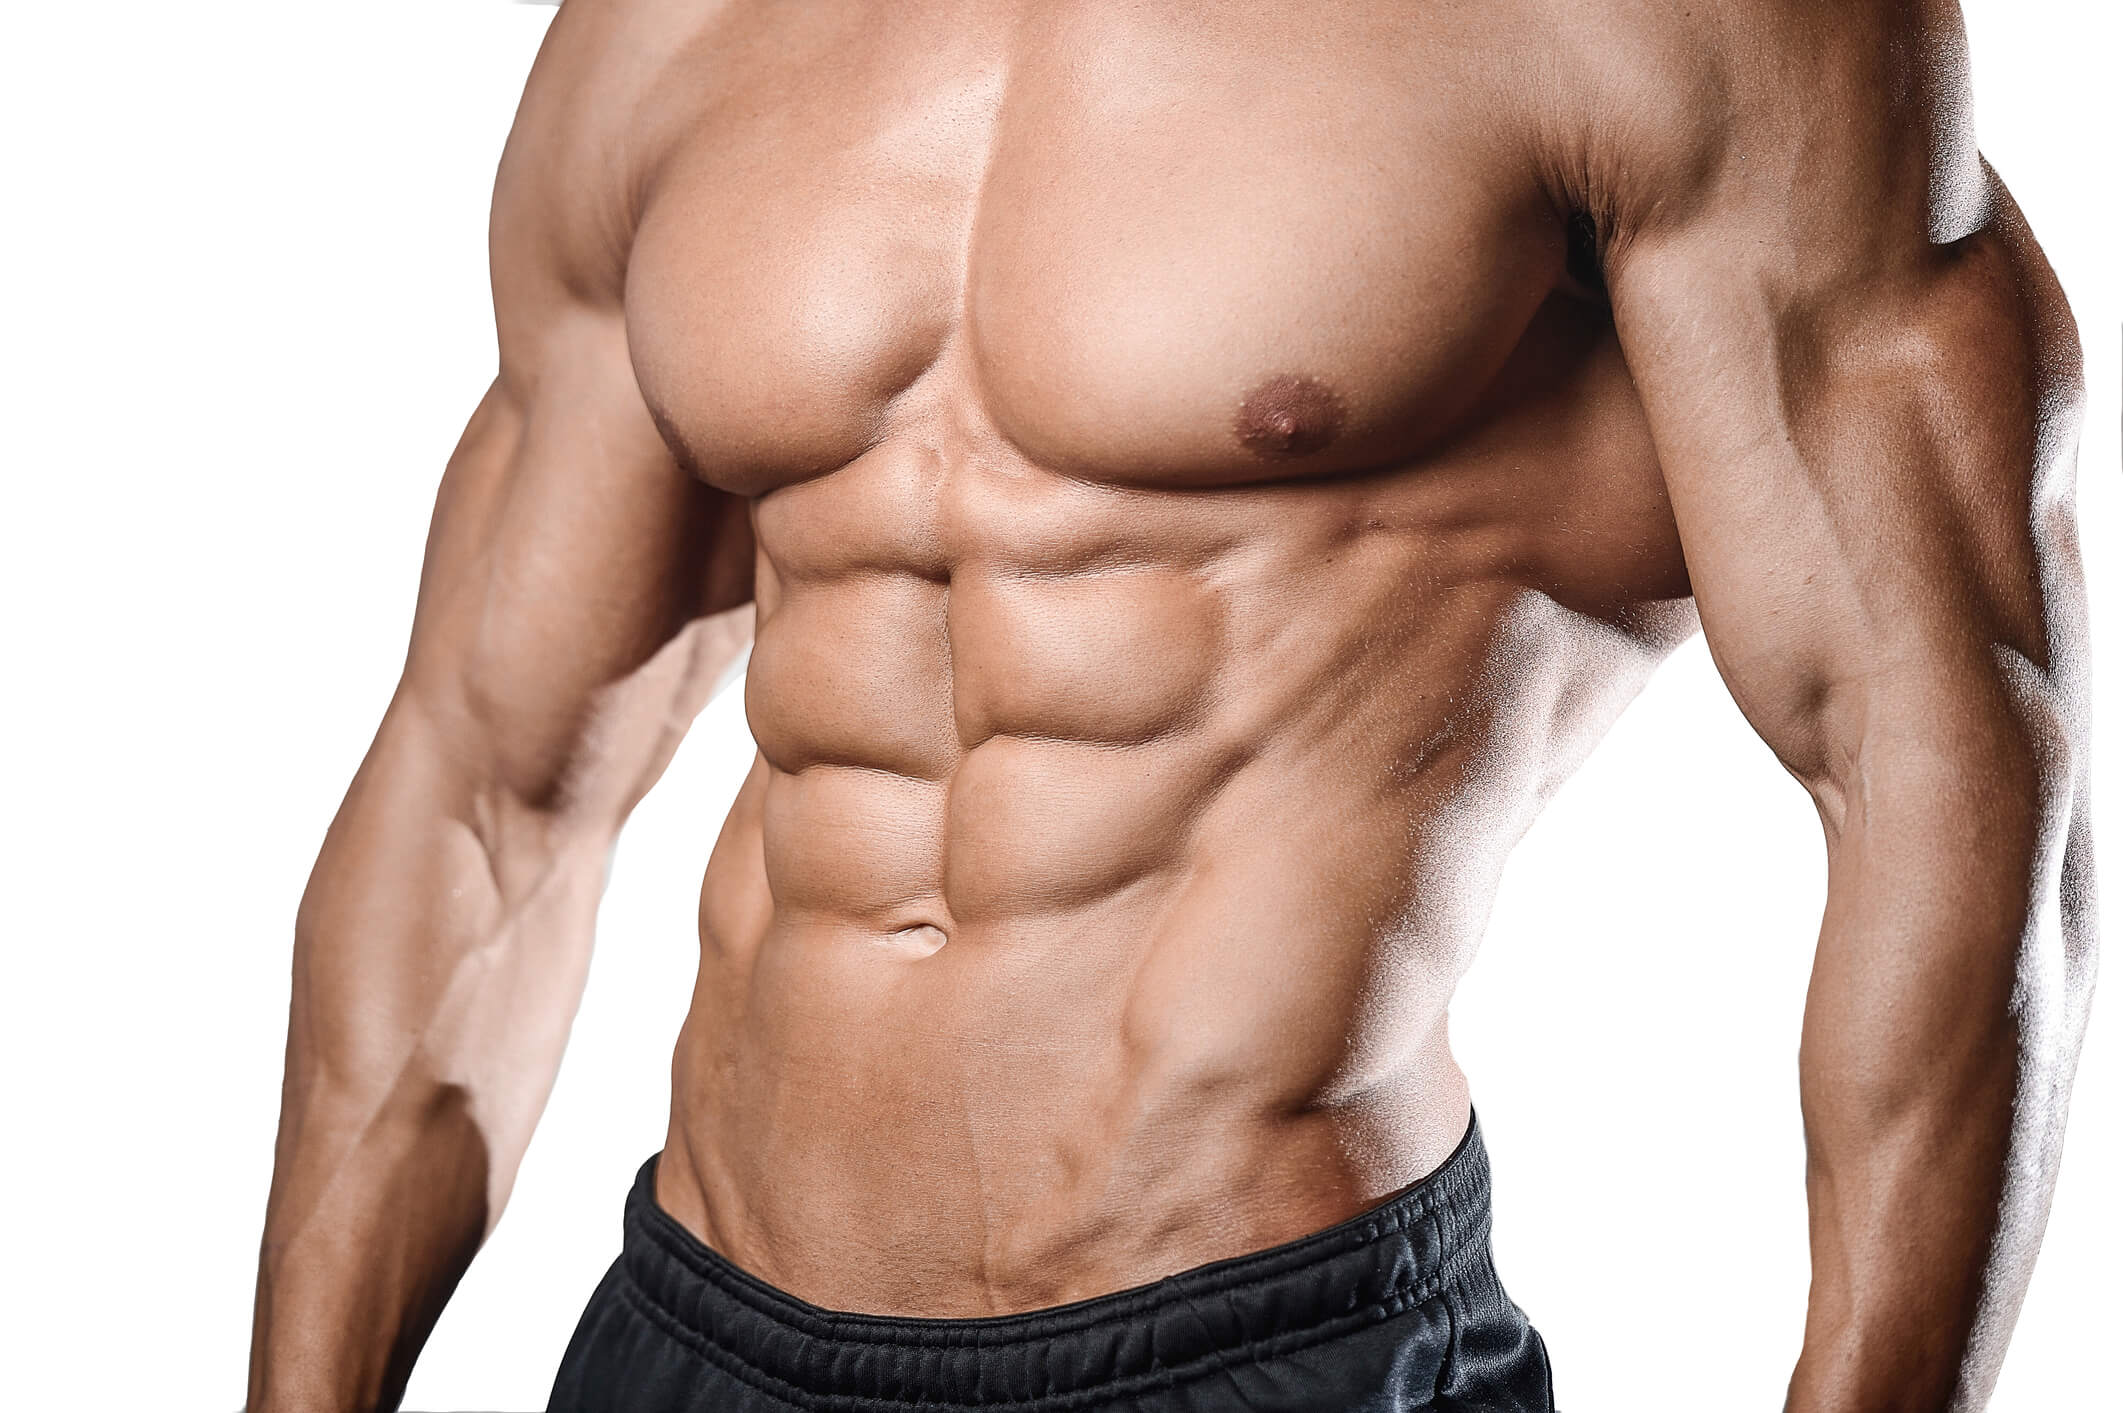 Bulking up whilst building out your abs is defined by great nutrition